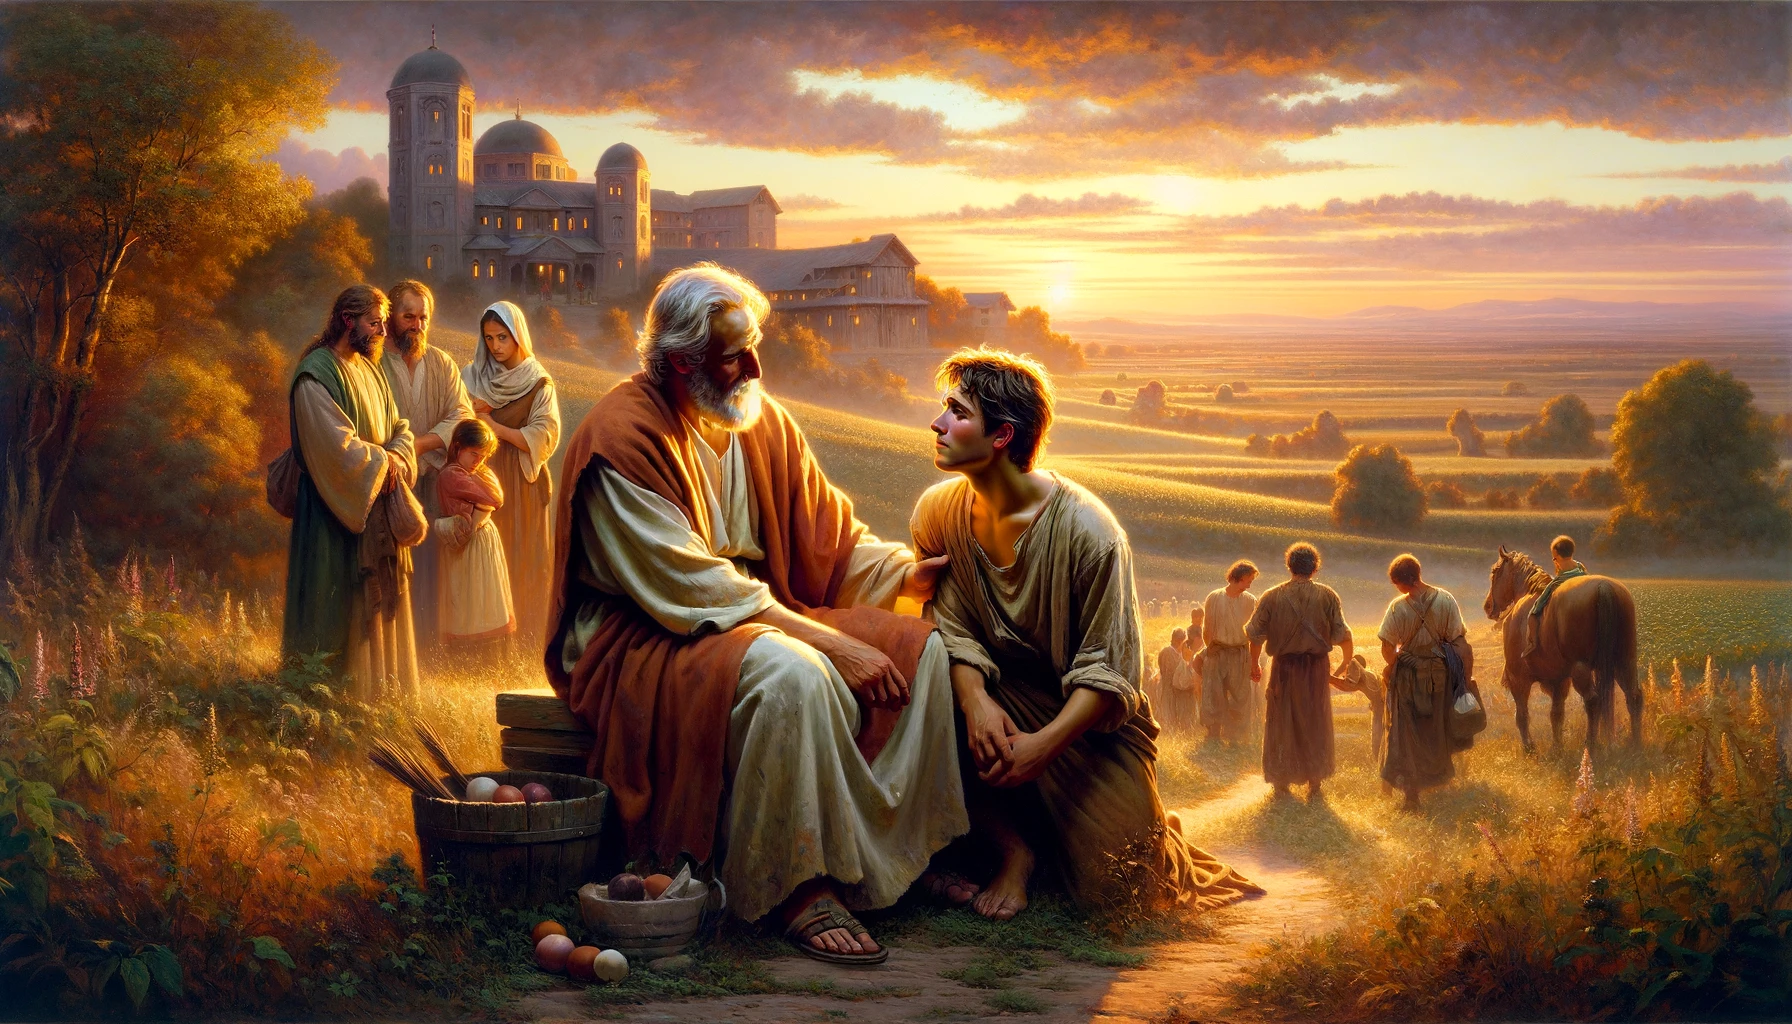 Image Depicting the Prodigal Son Bible Story